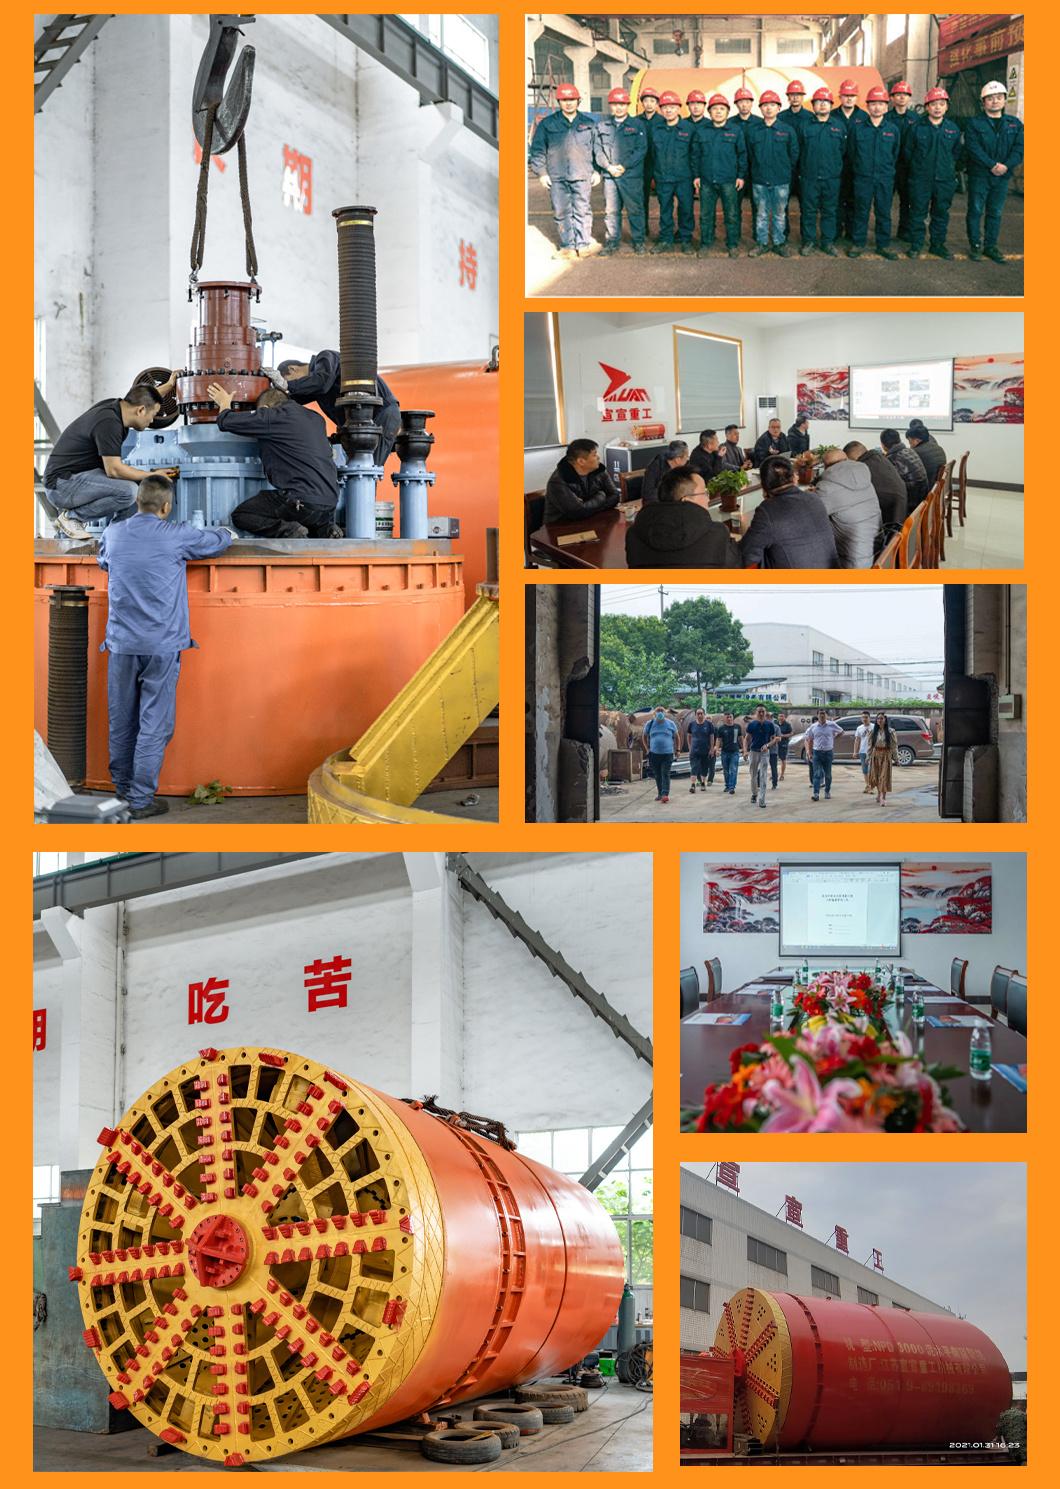 Professional Quality Trenchless Project Ysd3000 Rock Pipe Jacking Machine for Rcc